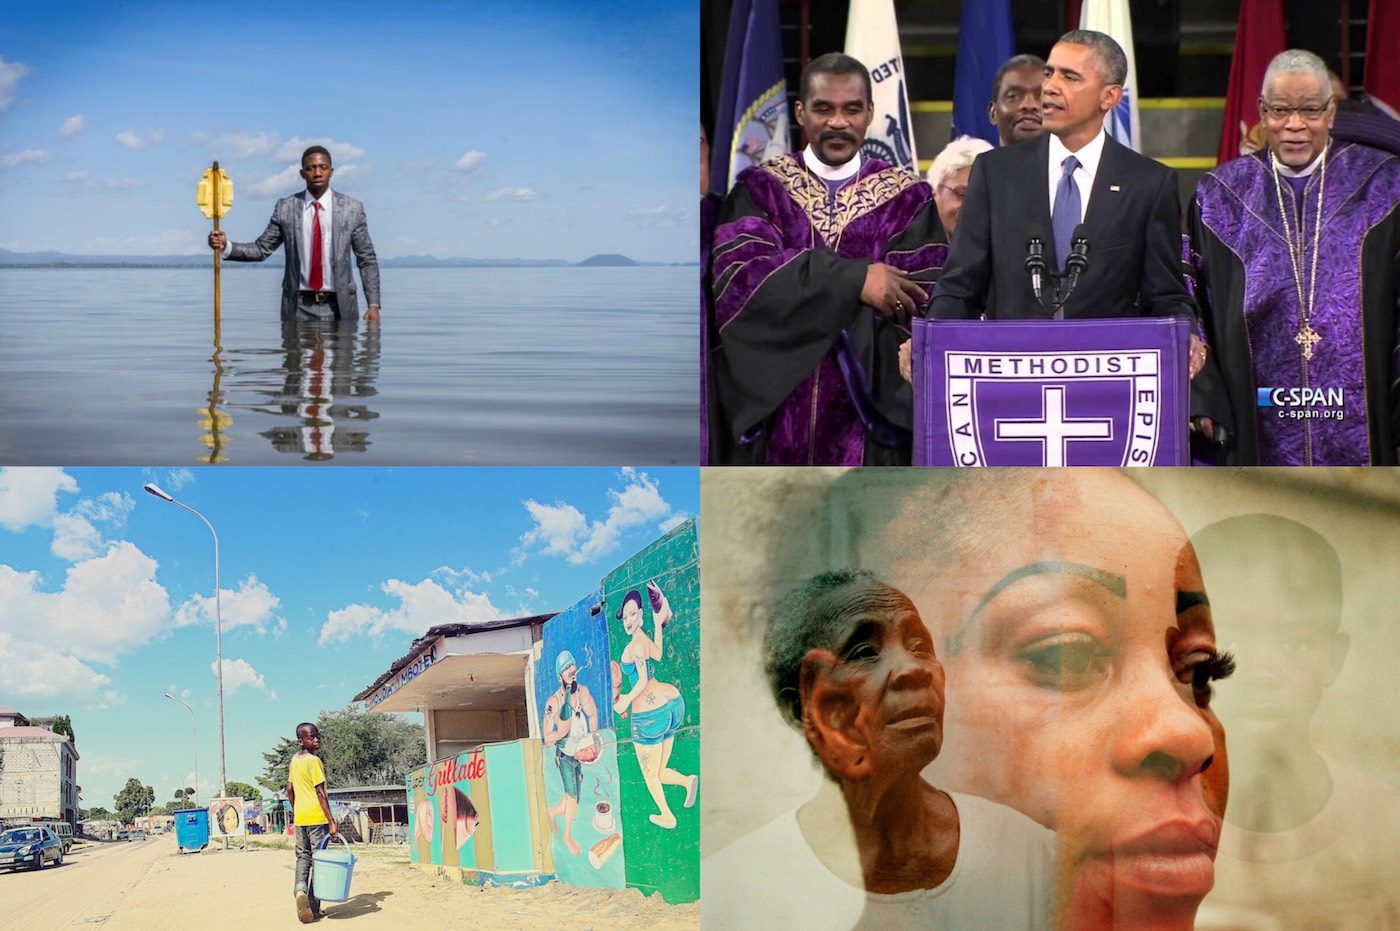 (bottom right): ZED, Présence absence, 2018. Courtesy the artist / (top right) Arthur Jafa, Love Is The Message, The Message Is Death (still), 2016, single-channel video (color, sound), 7:30 minutes, courtesy of the artist and Gavin Brown’s enterprise, New York/Rome./ (bottom left) ZED, Couleurs de Brazza, 2018. Courtesy the artist. / (top left) Ozhope Collective, “Row” (2018), Courtesy of the Collective.

